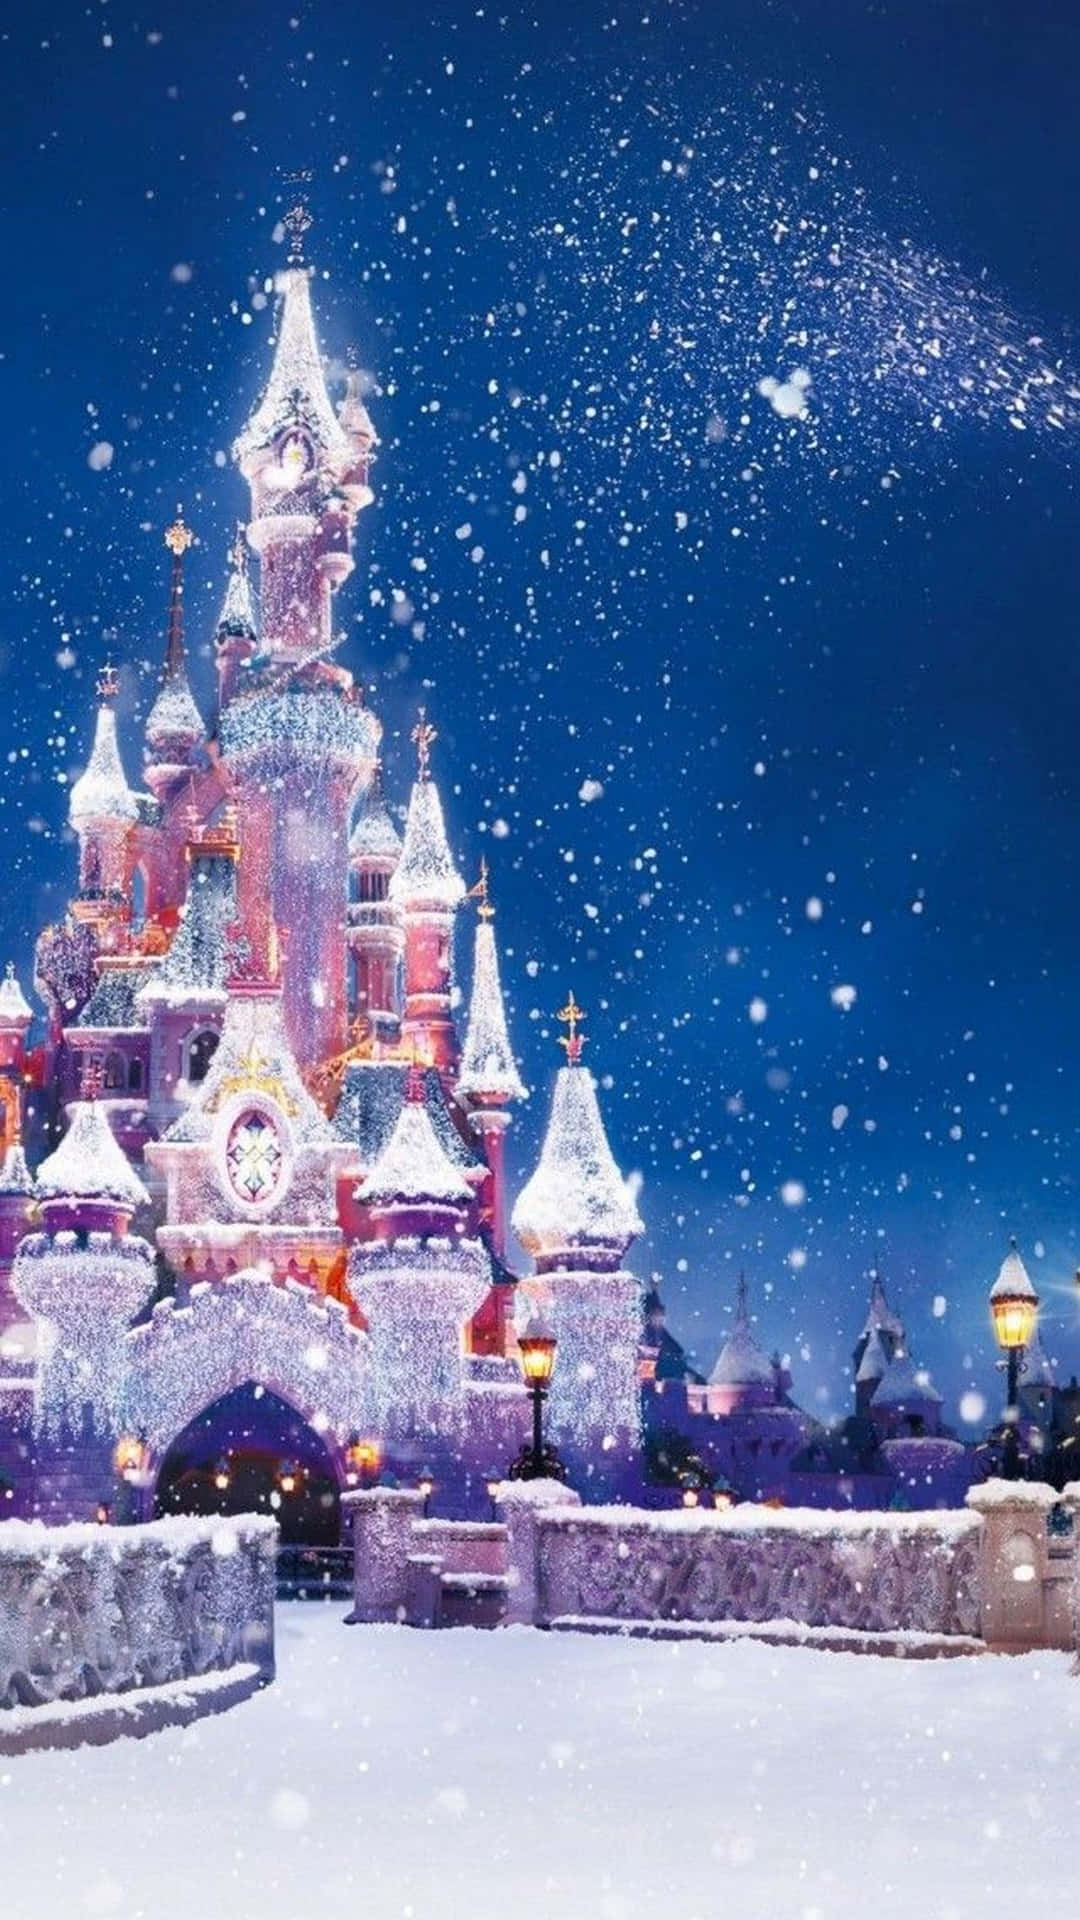 A Castle Is Covered In Snow And Snowflakes